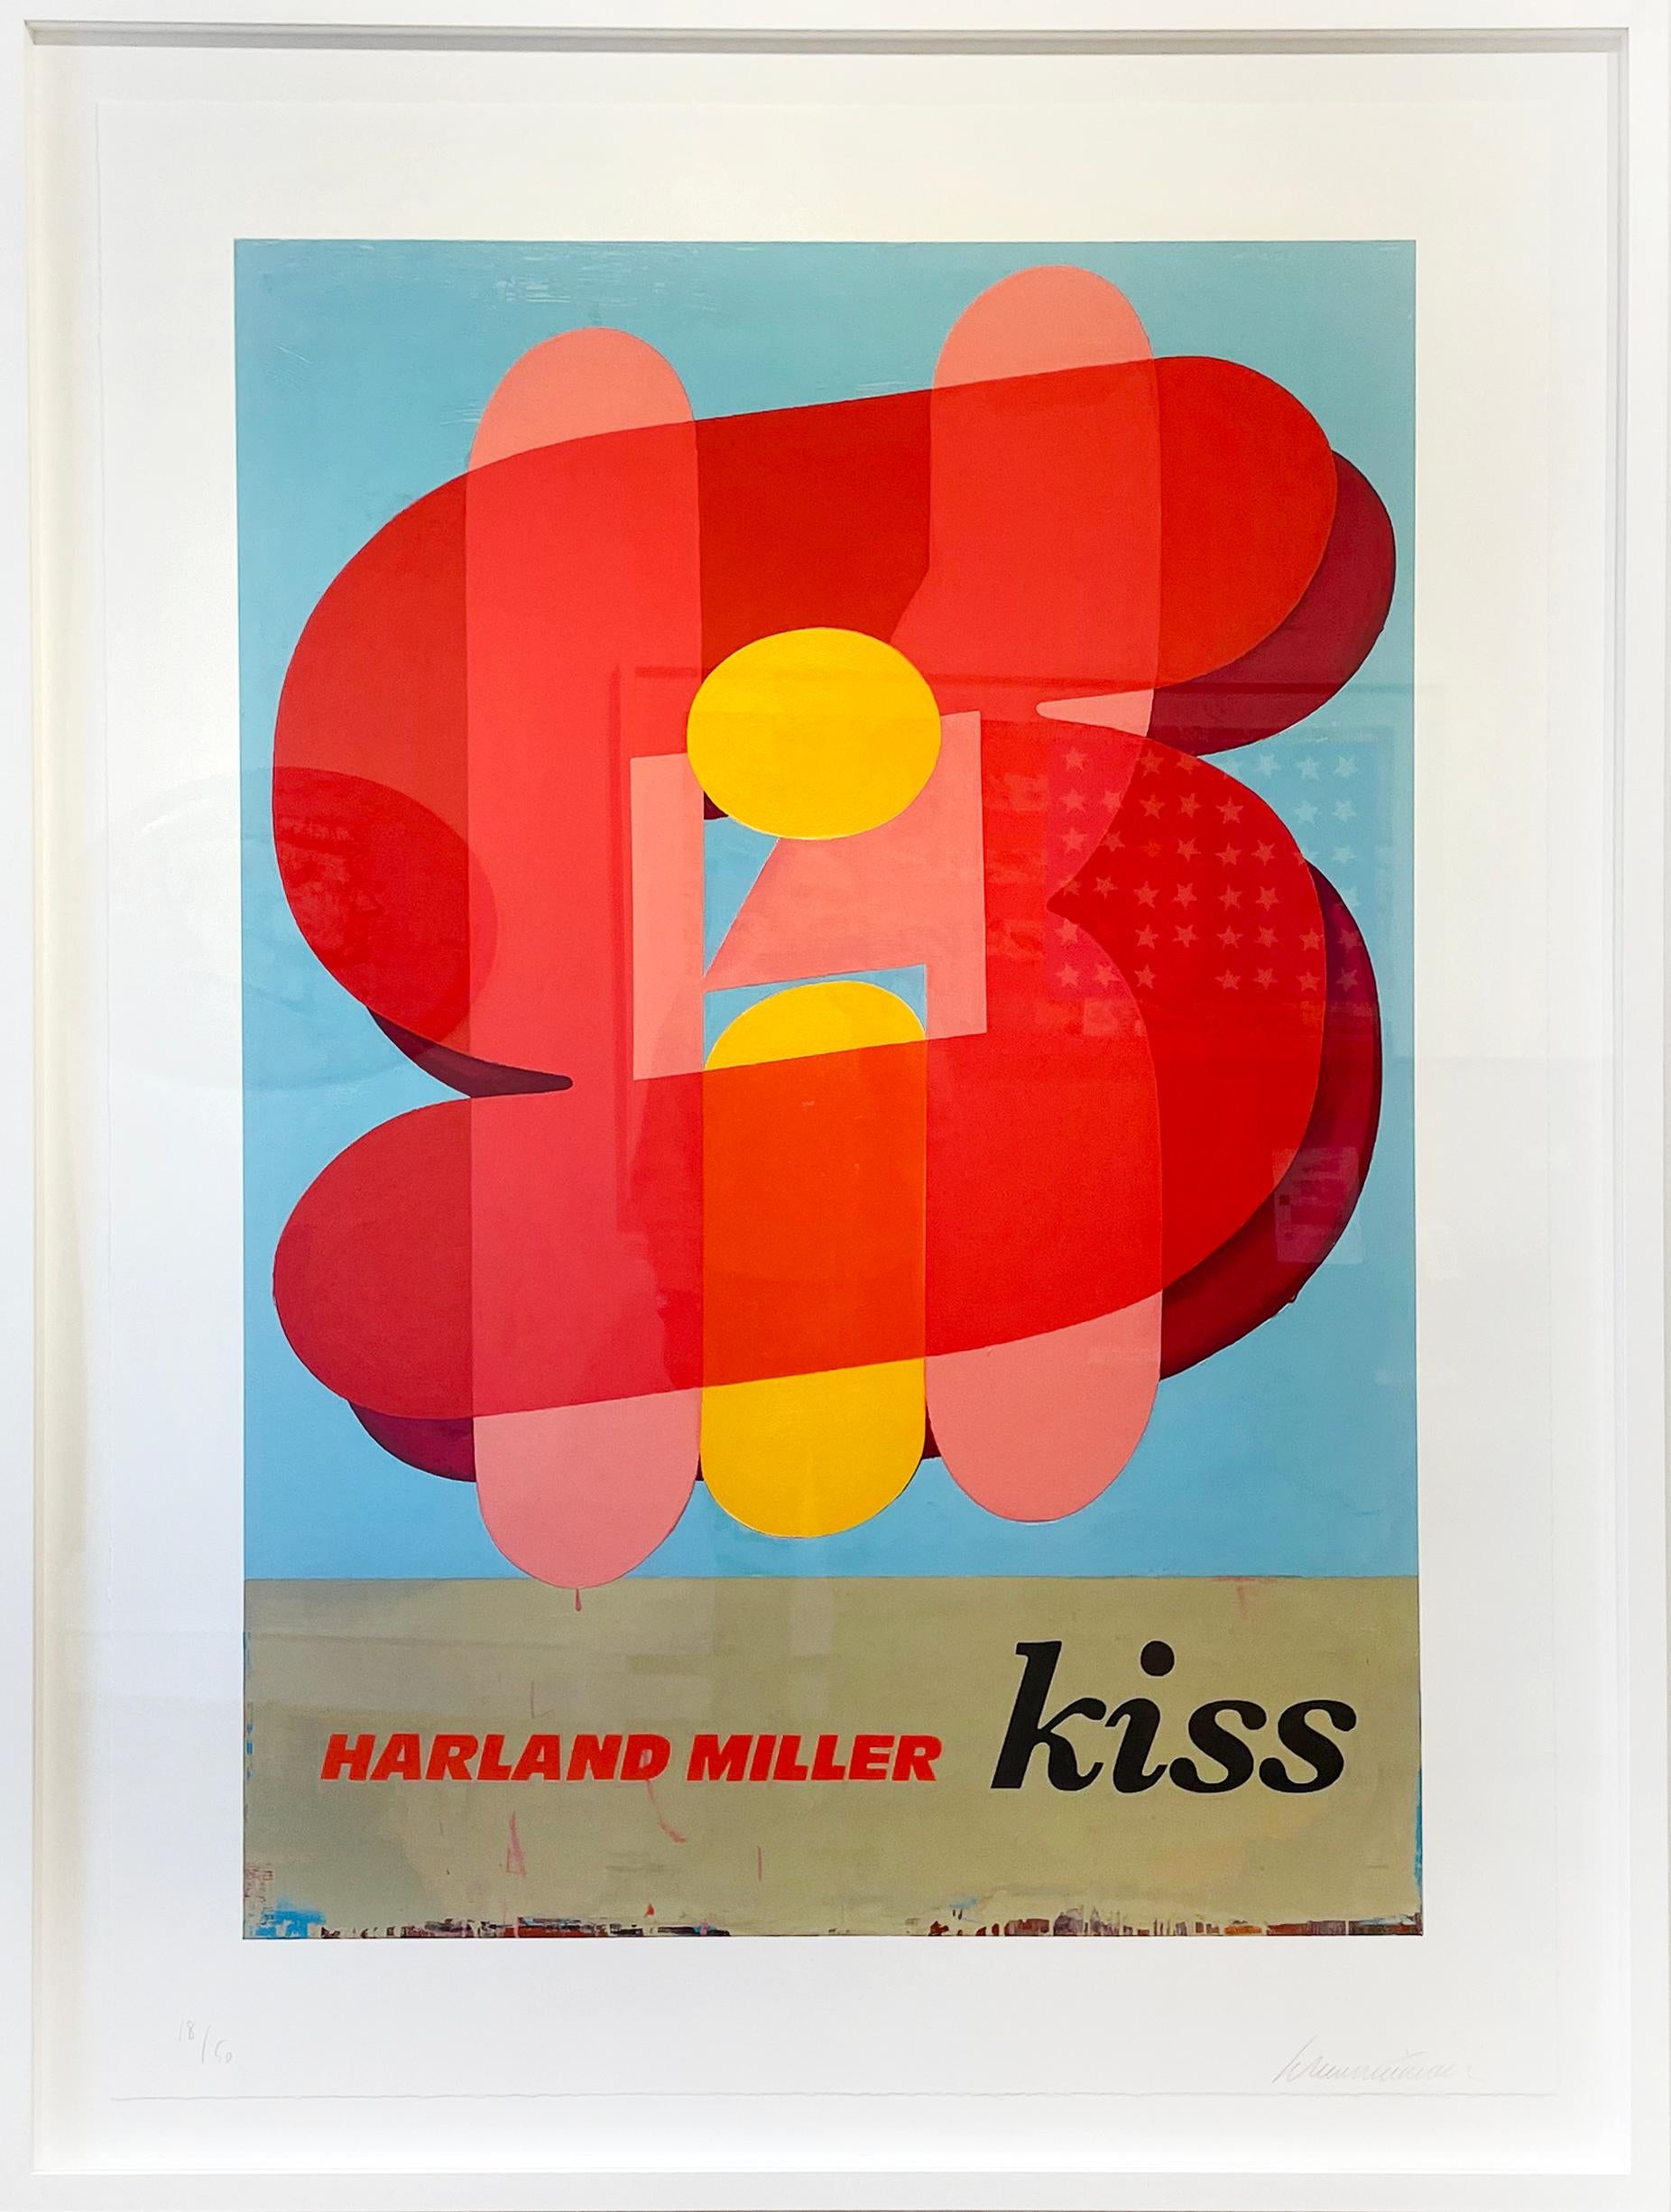 KISS - Print by Harland Miller